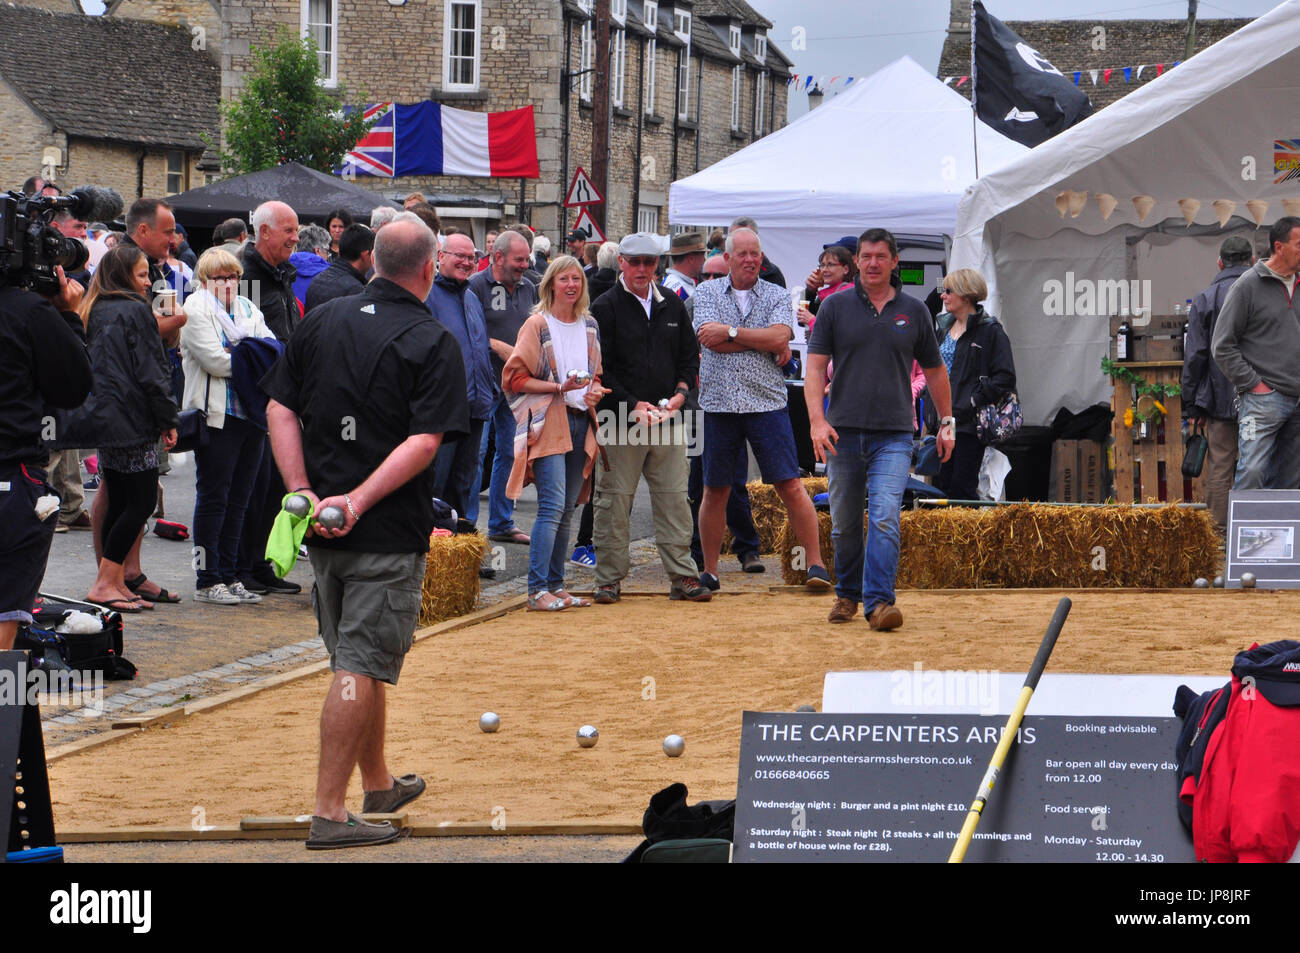 Boules competition, annual event in Sherston, UK .Keen players concentrating hard. Stock Photo